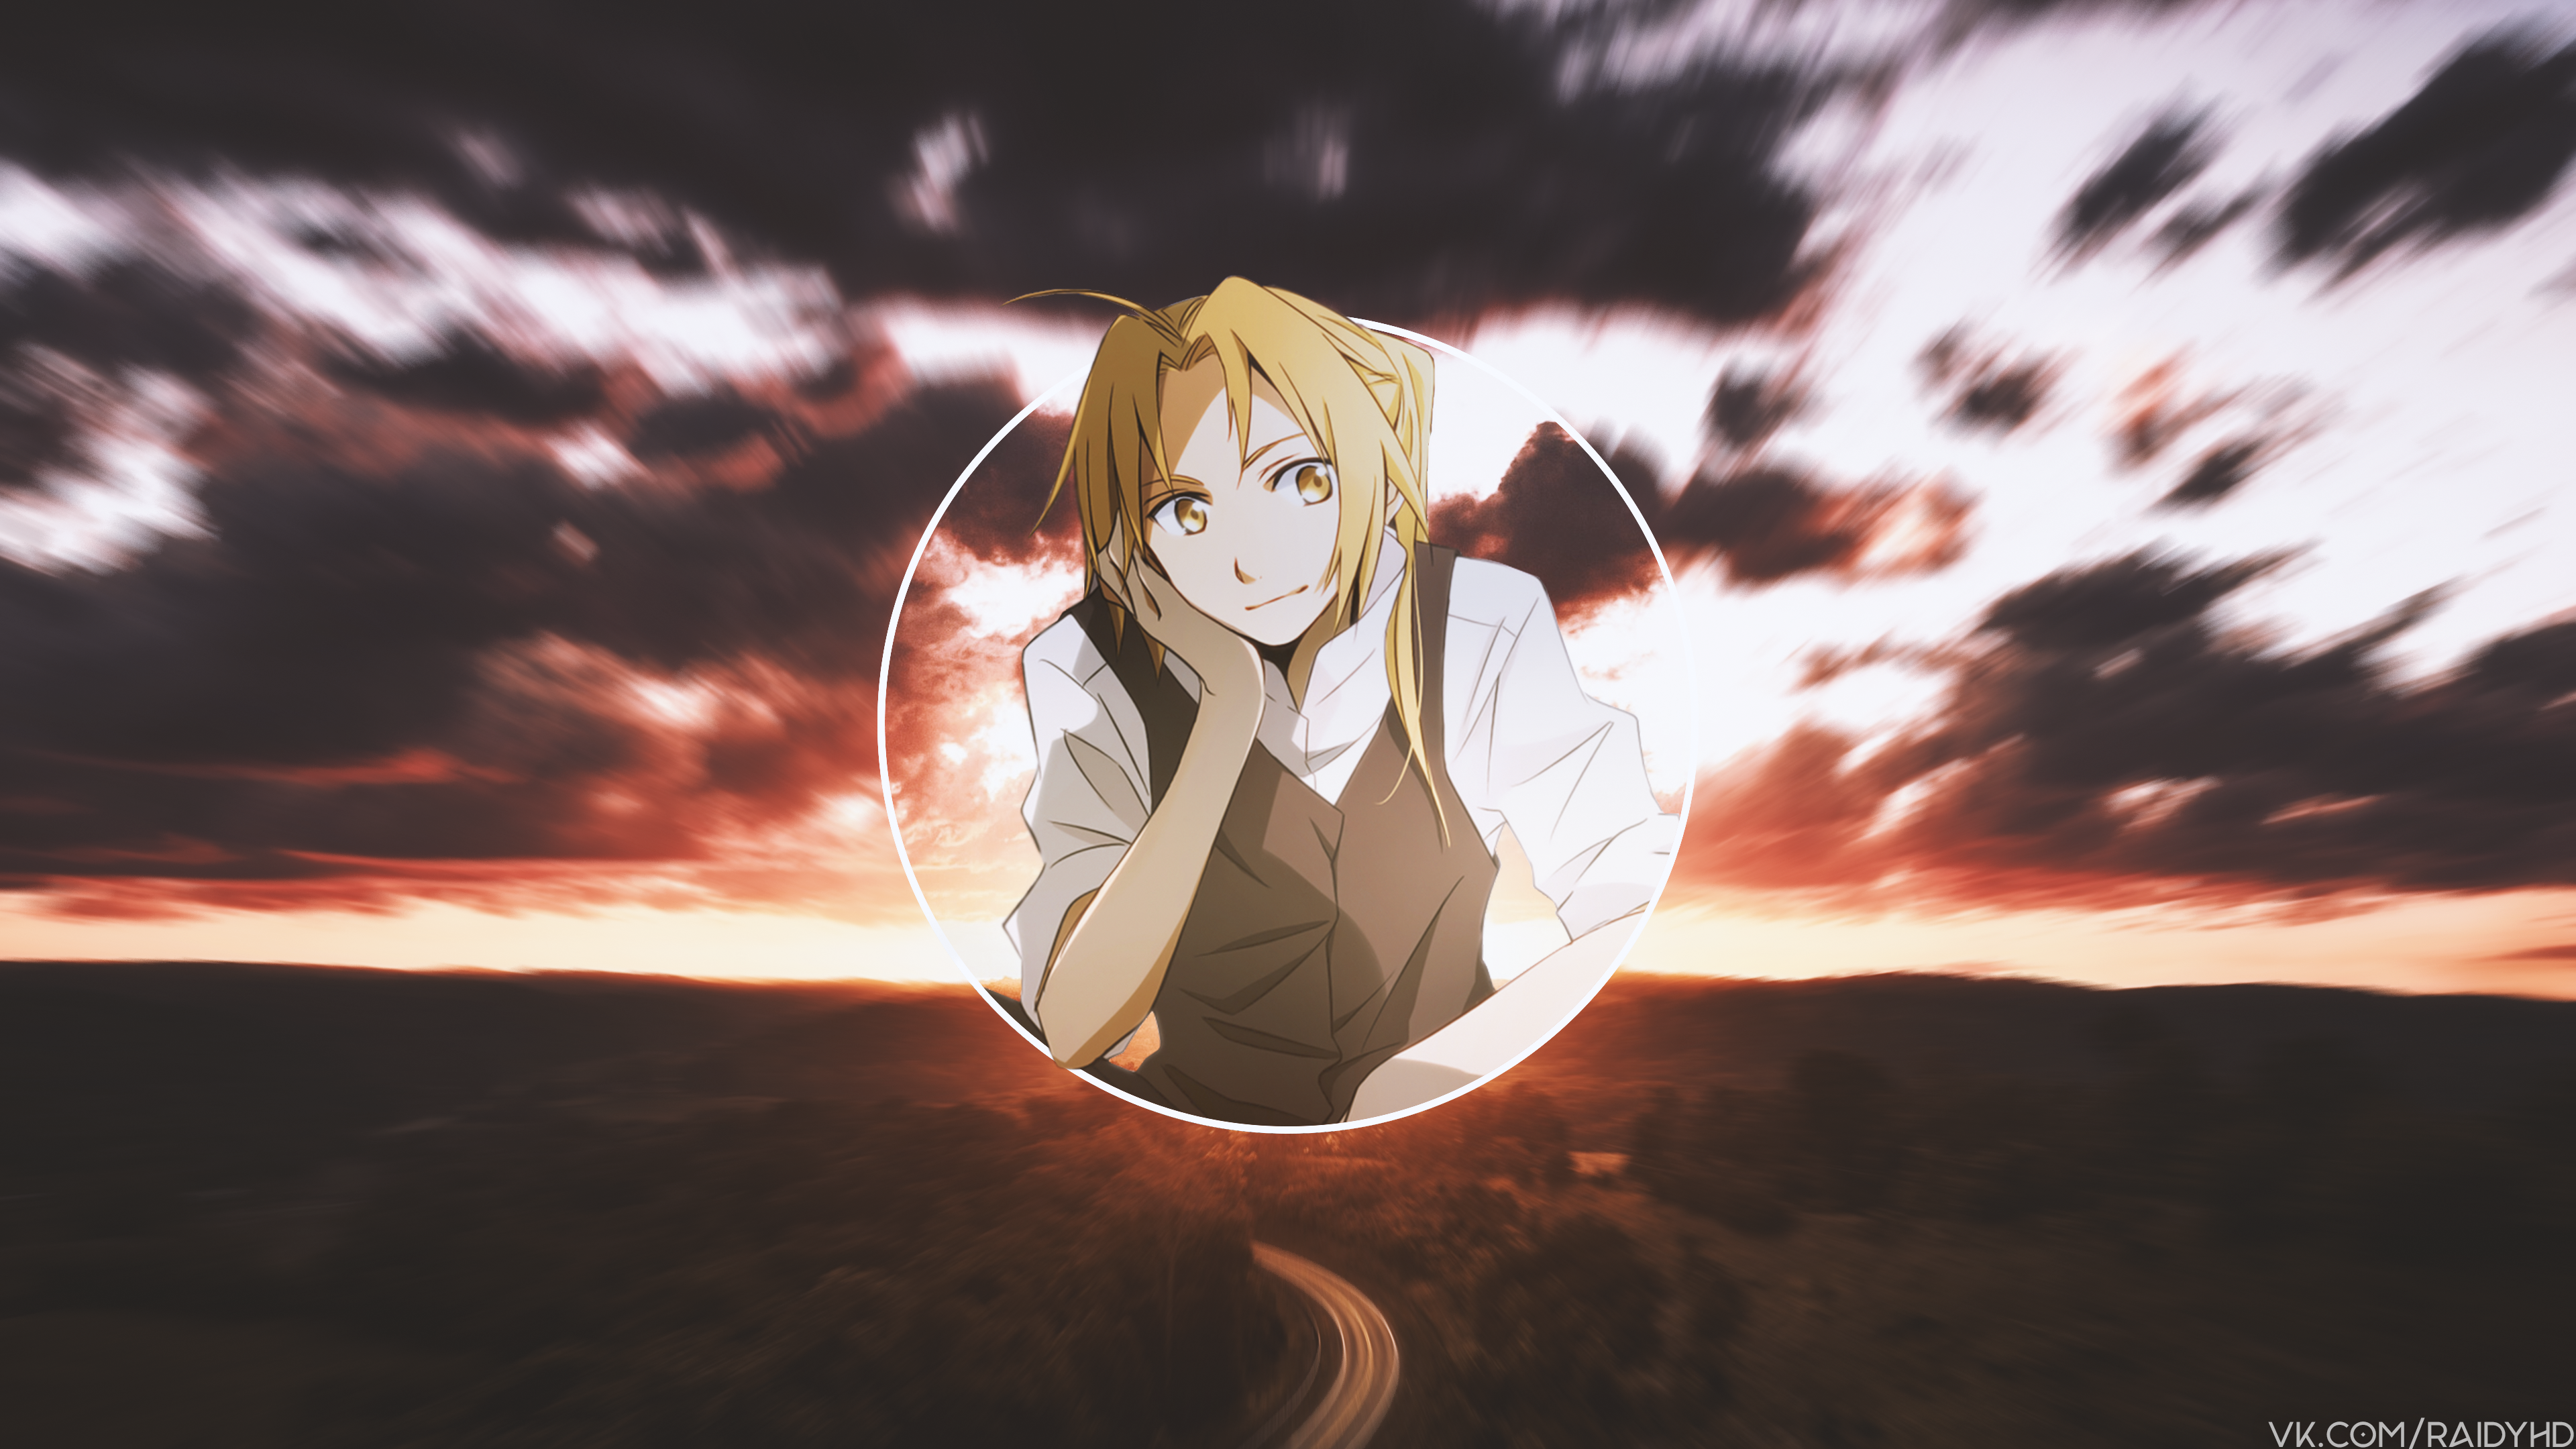 Anime 3840x2160 anime anime boys picture-in-picture Fullmetal Alchemist: Brotherhood Elric Edward